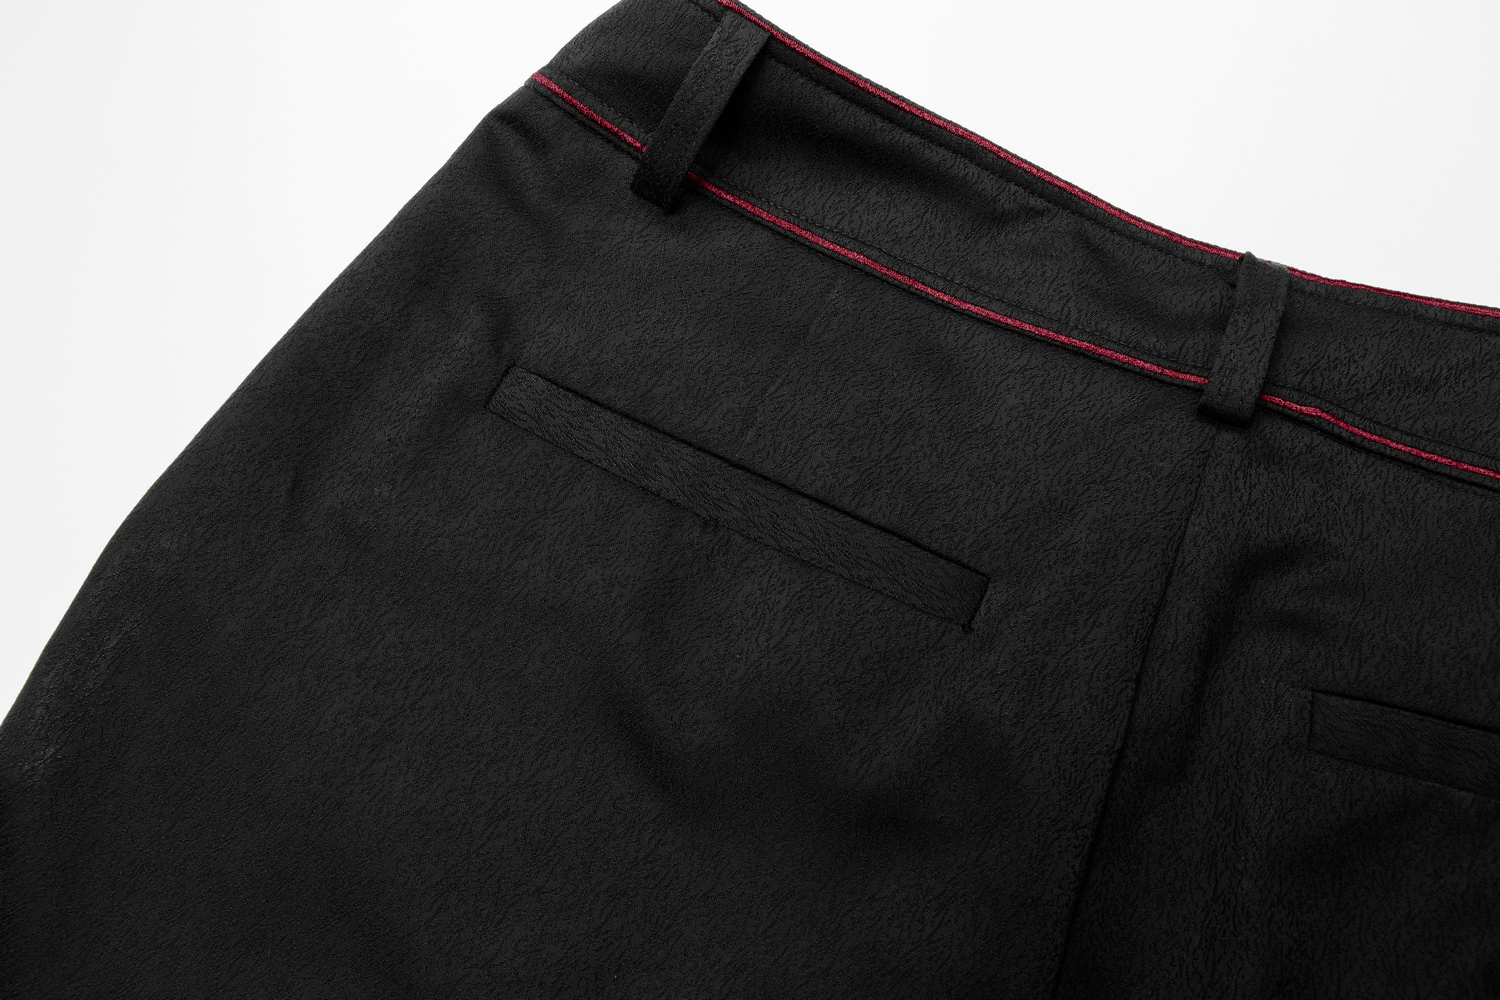 Men's Tailored Gothic Trousers with Embroidered Bat Accents